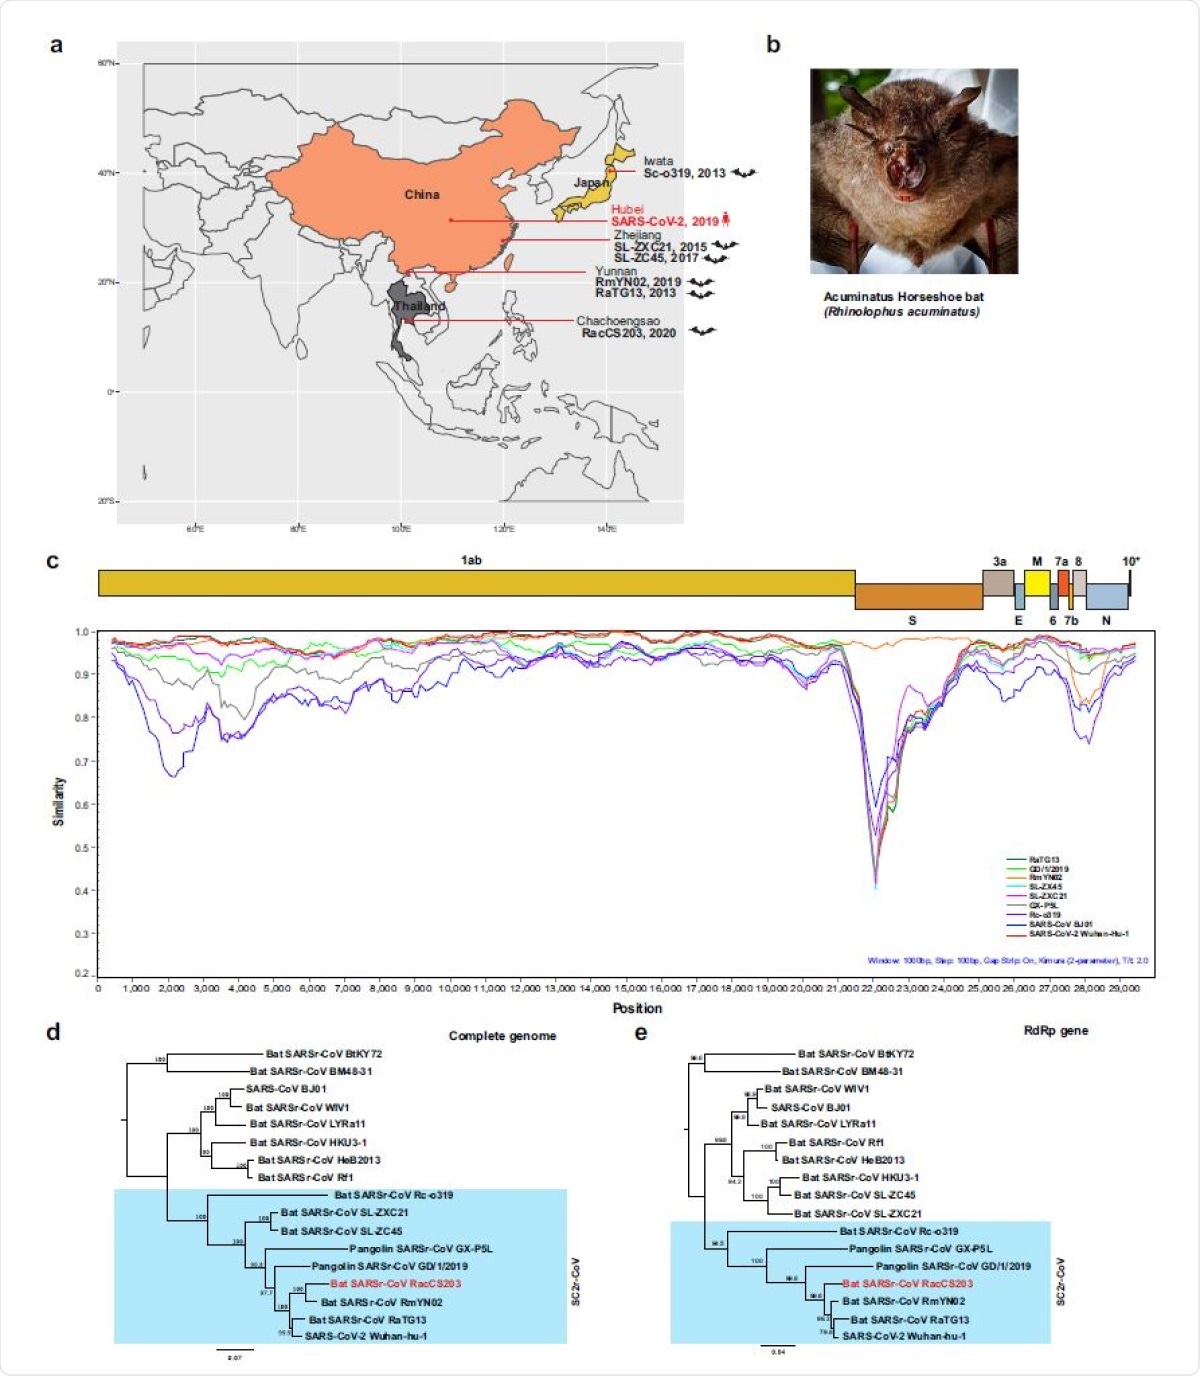 Molecular detection of a SC2r-CoV in bats in Thailand. a Map of Asia illustrating the SC2r-CoVs detected in this region to date. b The Acuminatus horseshoe bats from which the SC2r-CoV was detected. Photo taken by the Thai research team of this study group. c Similarity plot (SimPlot) of wholegenome sequences of 10 SARSr-CoVs using the RacCS203 as a reference genome. d Phylogenetic tree based on whole-genome sequences. e Phylogenetic tree based on the RdRp gene sequences. The trees in d and e were generated using PhyML with general-time-reversible (GTR) substitution model and 1000 bootstrap replicates. Numbers (>70) above or below the branches are percentage bootstrap values for the associated nodes. The scale bar represents the number of substitutions per site. RacCS203 was highlighted in red.